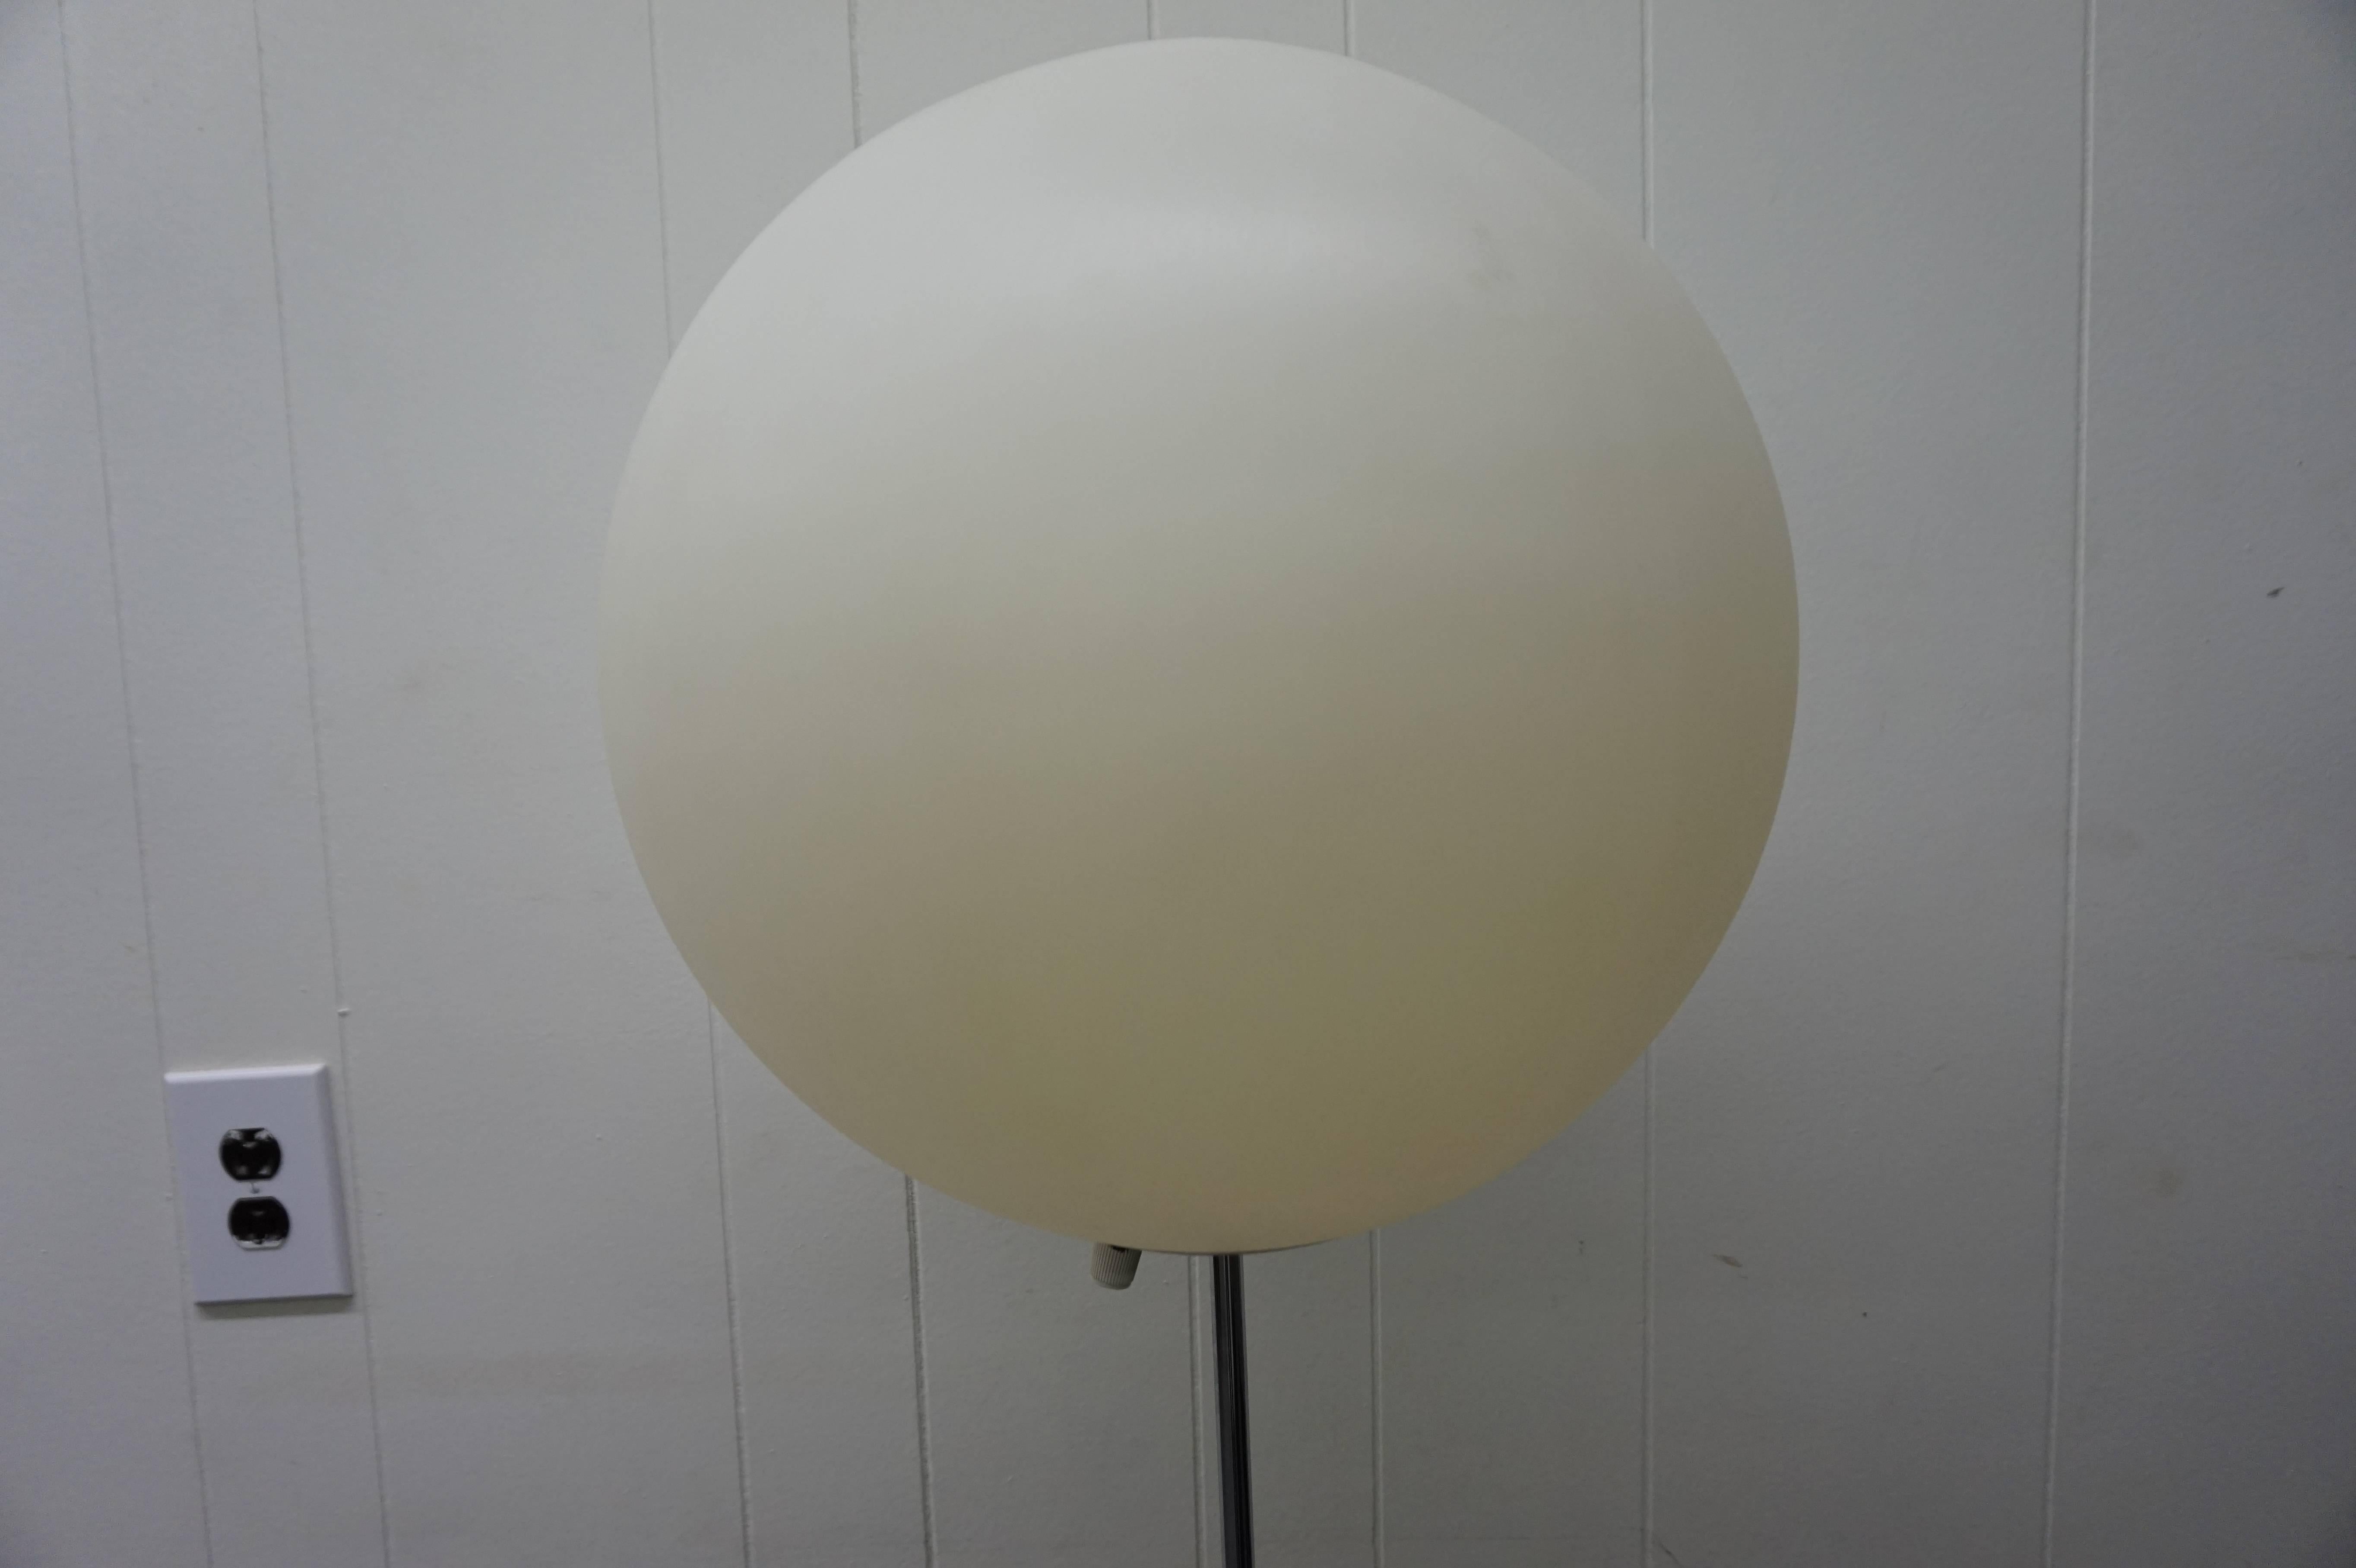 Fun Panton style large globe floor lamp. Oversized plastic globe sits on lovely chrome base. Adds tremendous pop appeal to any room.